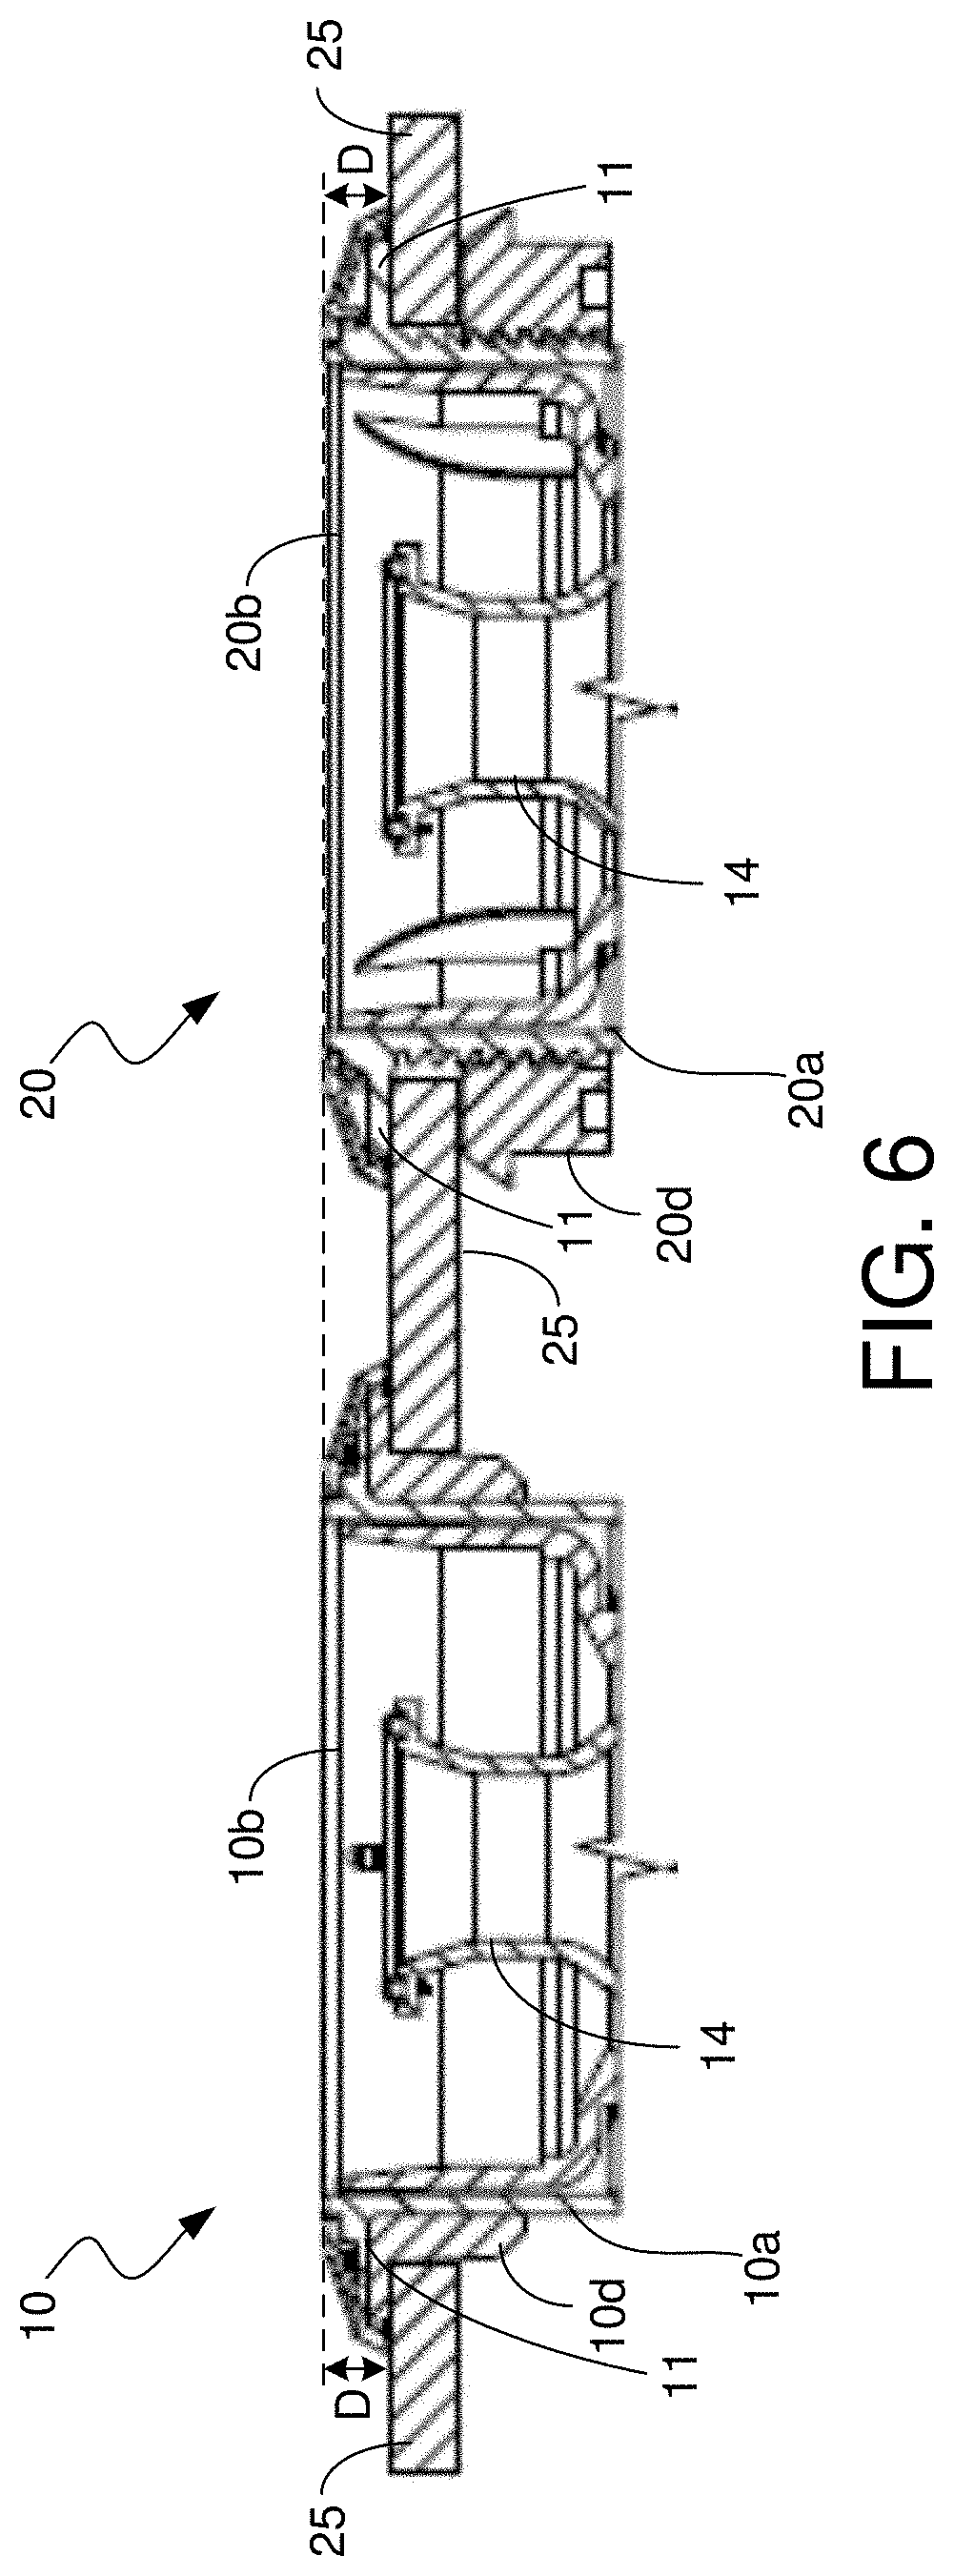 Low profile spa jet assemblies and method